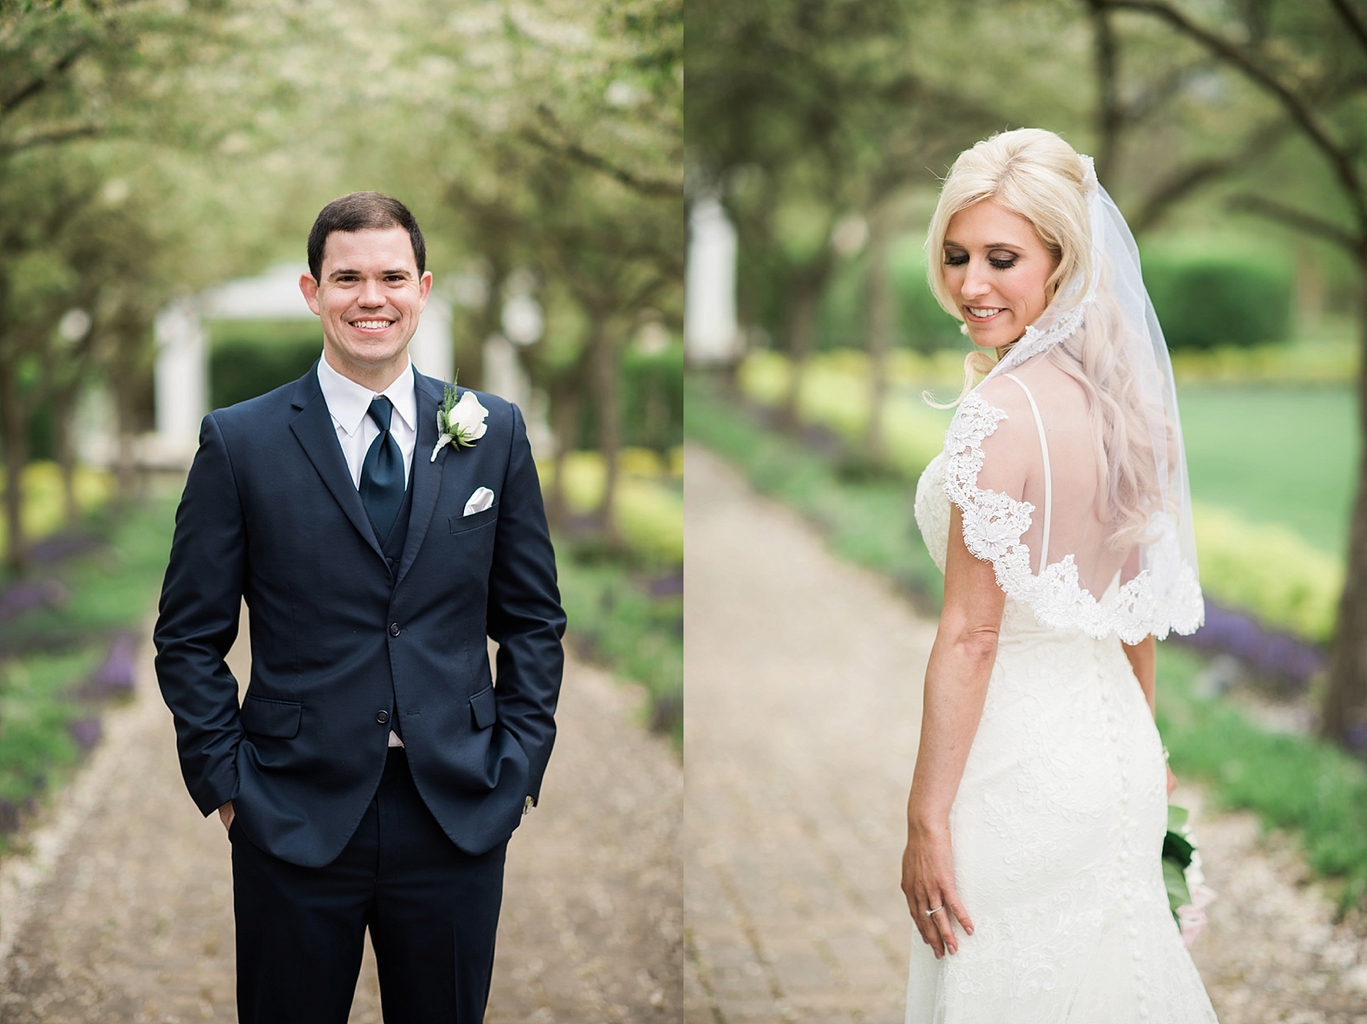 Wellers Carriage House in Saline; bride and groom portraits in the gardens